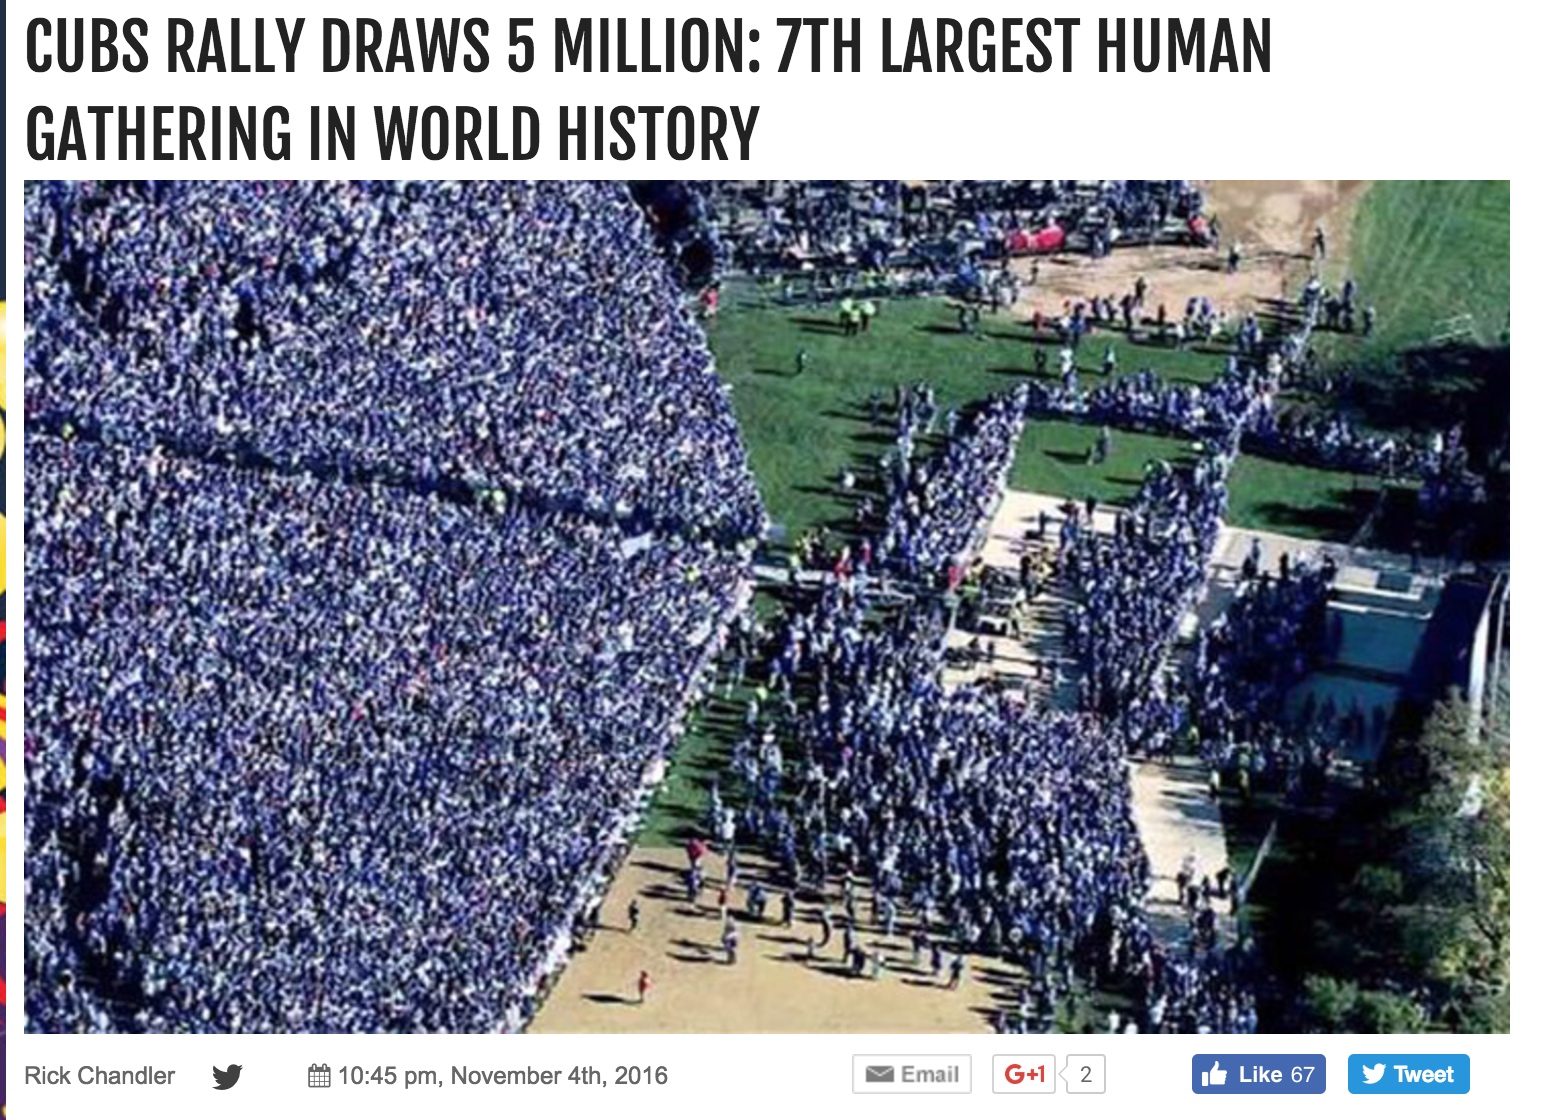 "cubs rally draws 5 million: 7th largest human gathering in world history"